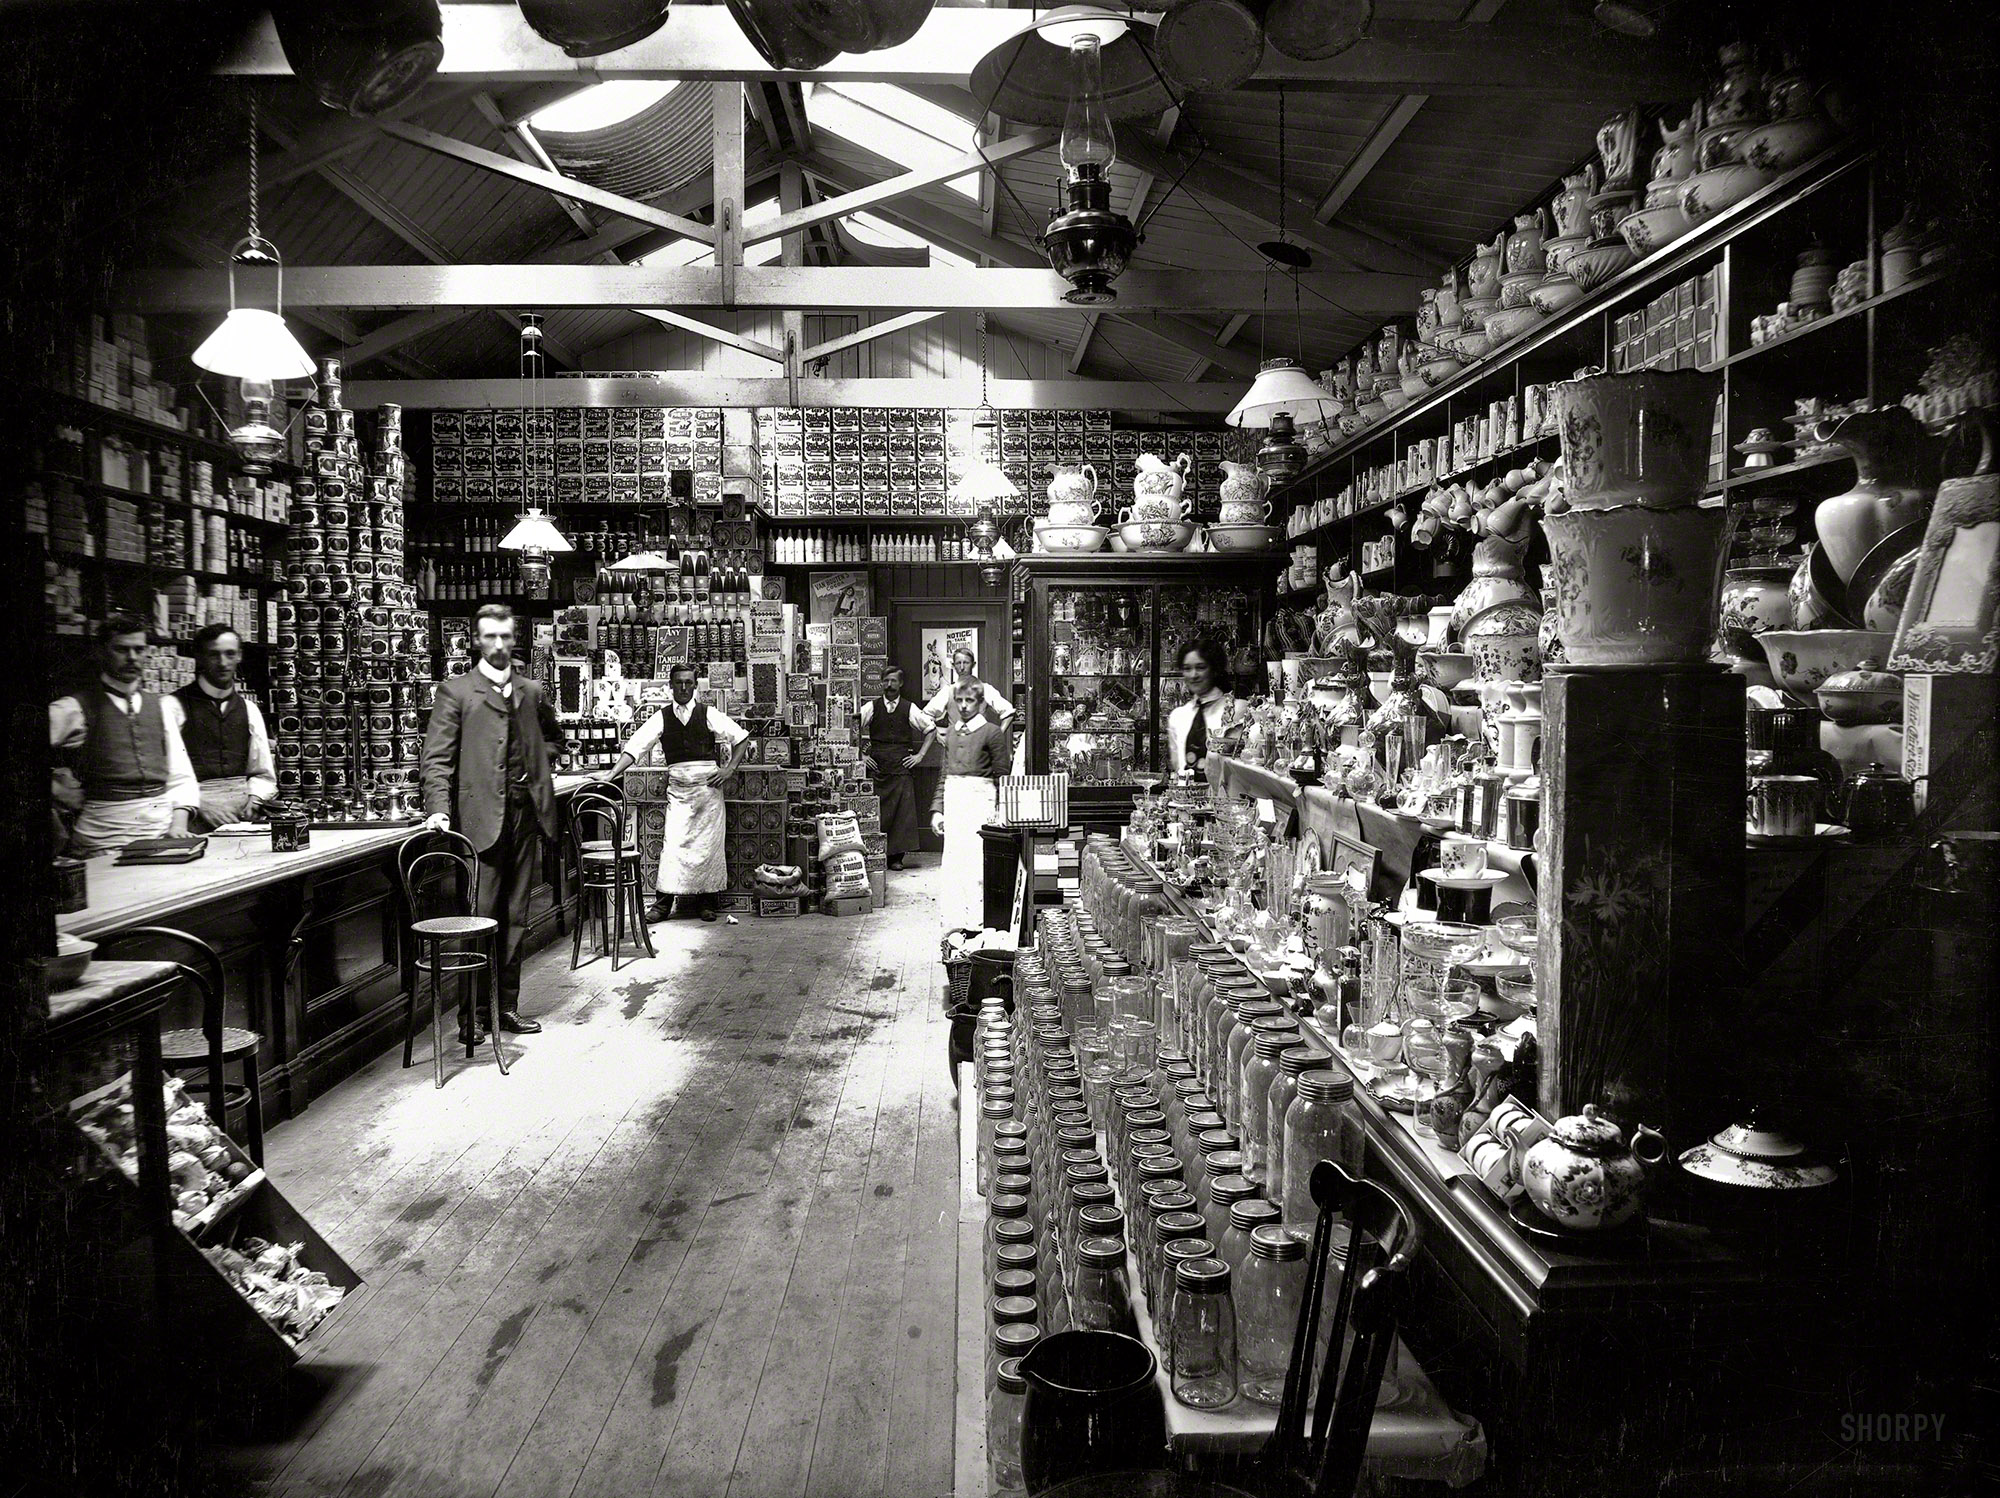 1890s New Zealand. "Grocery shop interior, with staff, location unidentified." Silver gelatin print, photographer unknown. View full size.